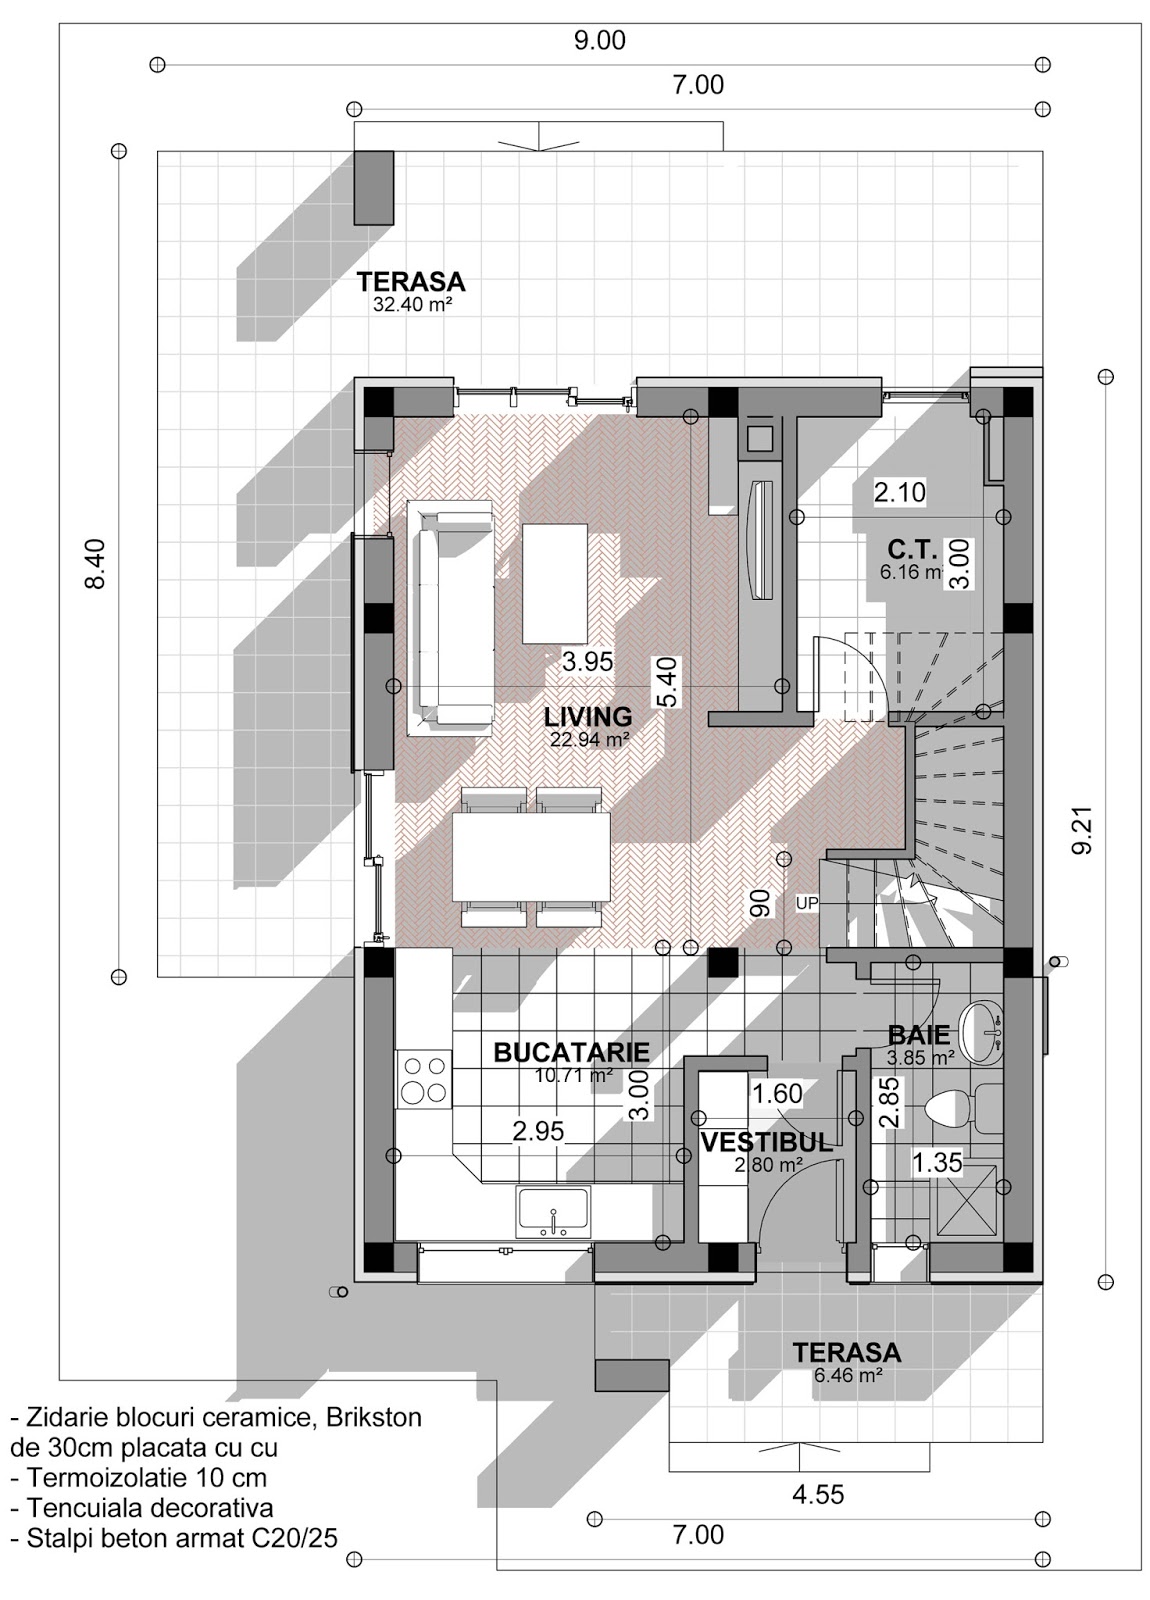 Two-story house plans are more inexpensive than one-story homes. It is more systematic to construct and live in a two-story layout. Whatever your reason for choosing a two-story home, we know there's a design that has everything you want. Here are some free floor plans and layout for you.